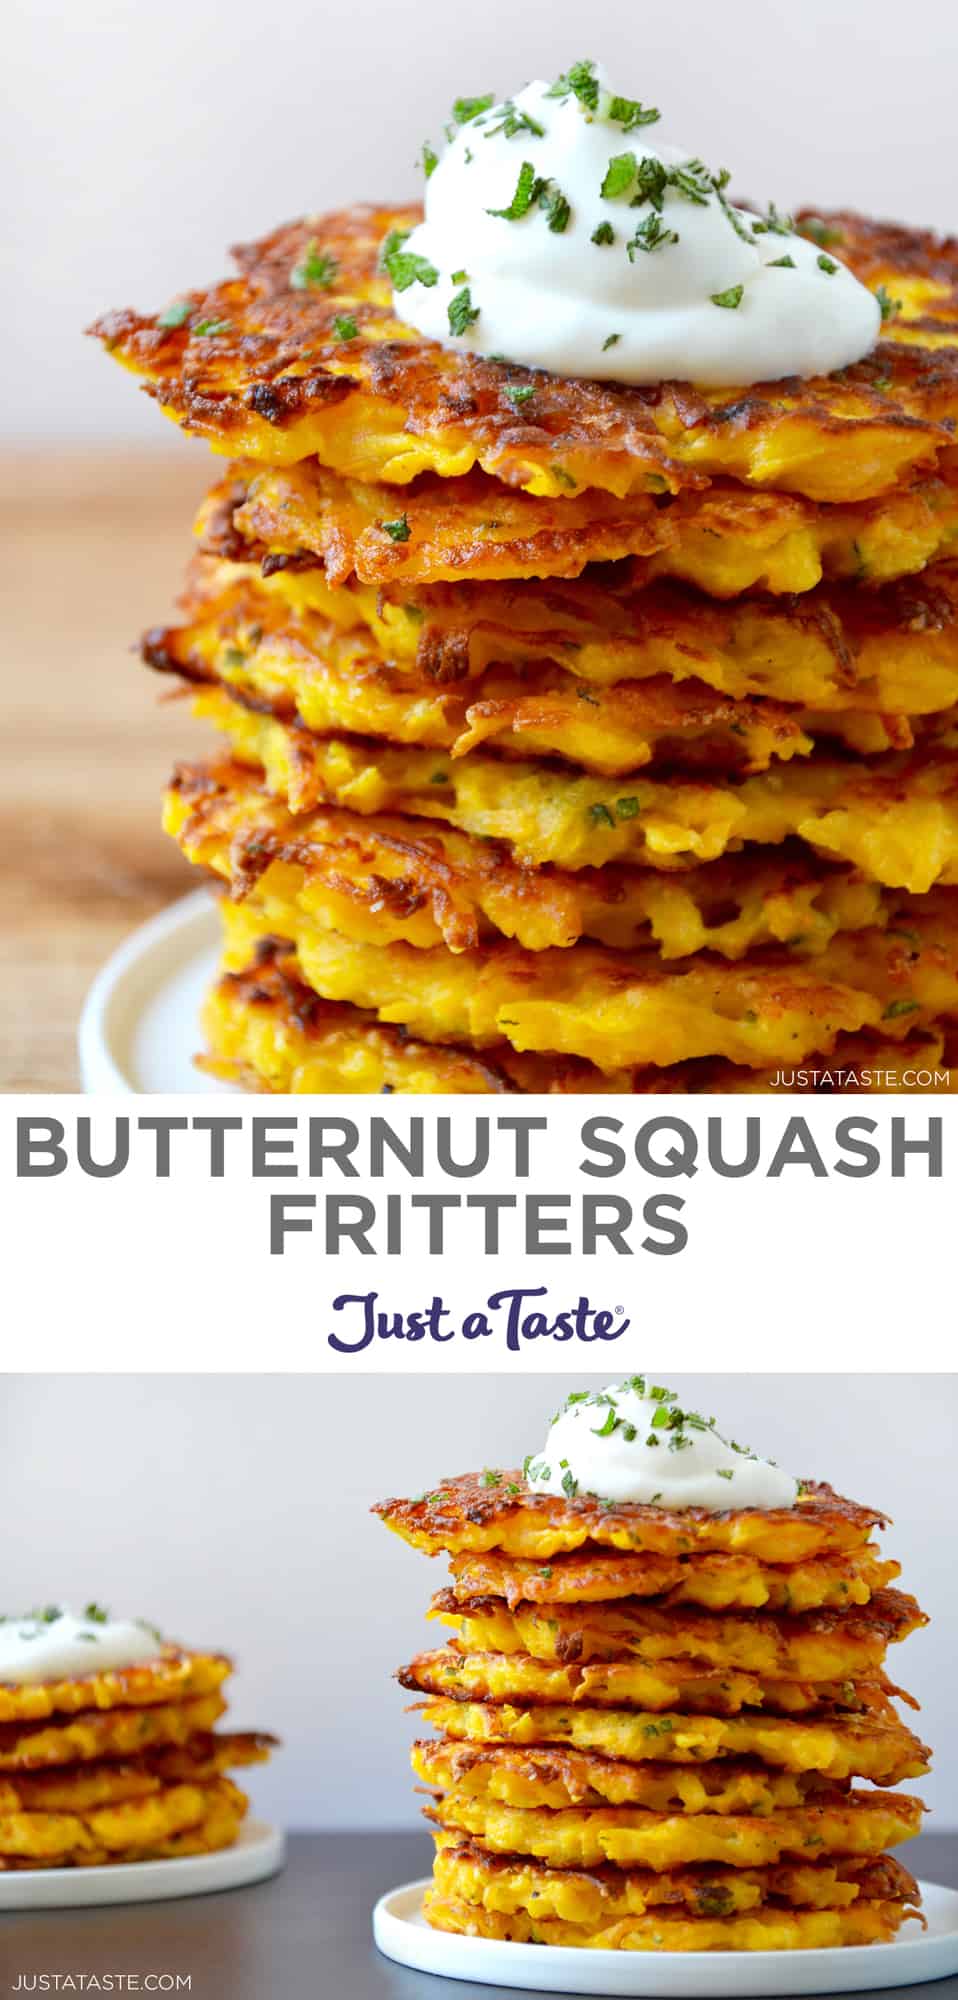 5-Ingredient Butternut Squash Fritters - Just a Taste